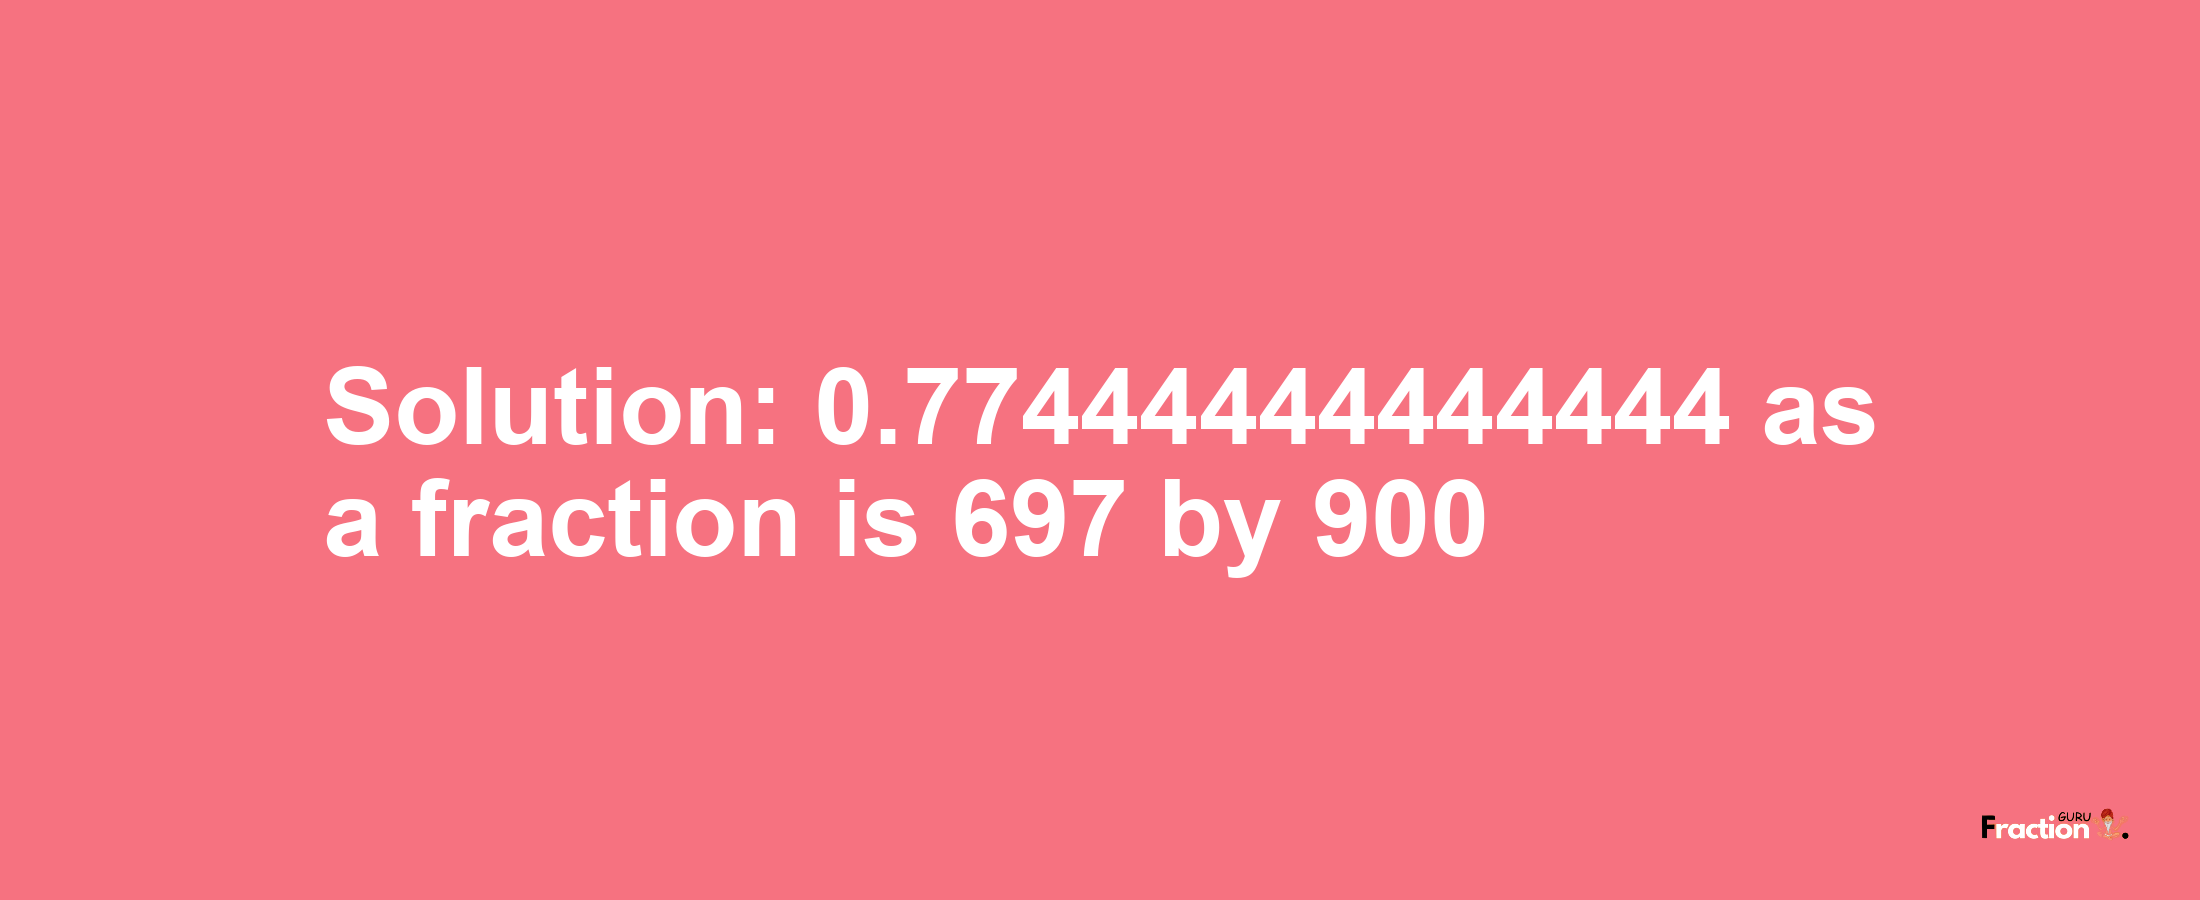 Solution:0.77444444444444 as a fraction is 697/900